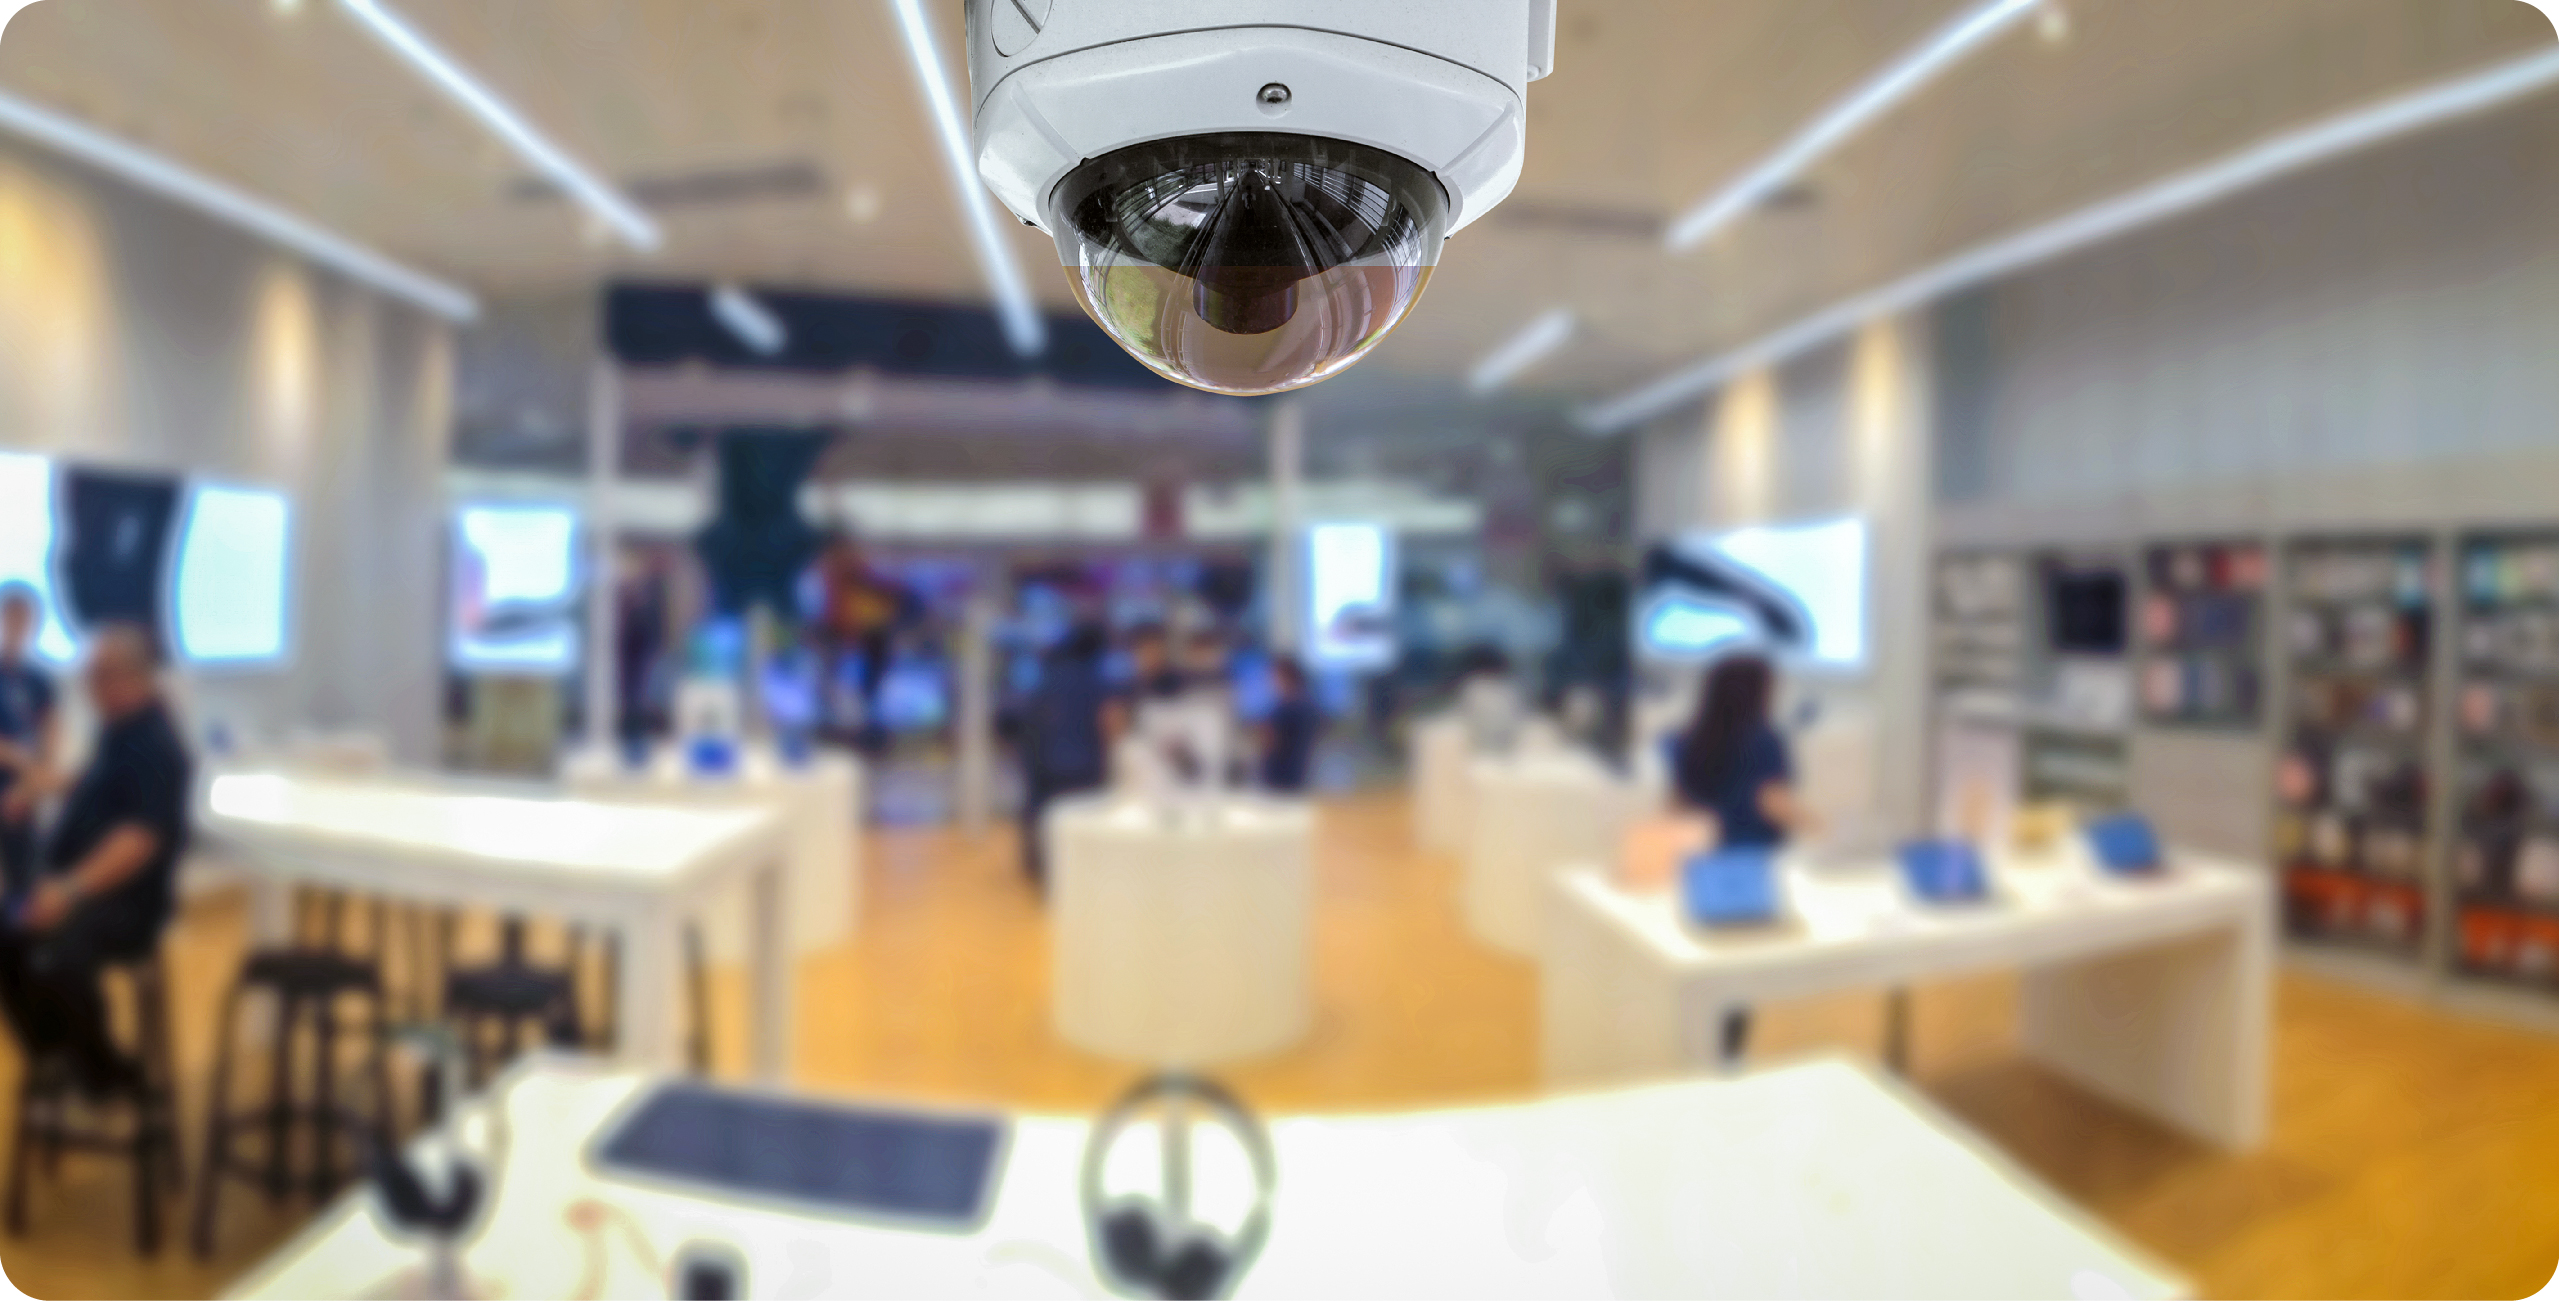 Tips for Choosing the Best CCTV System for Home & Small Business